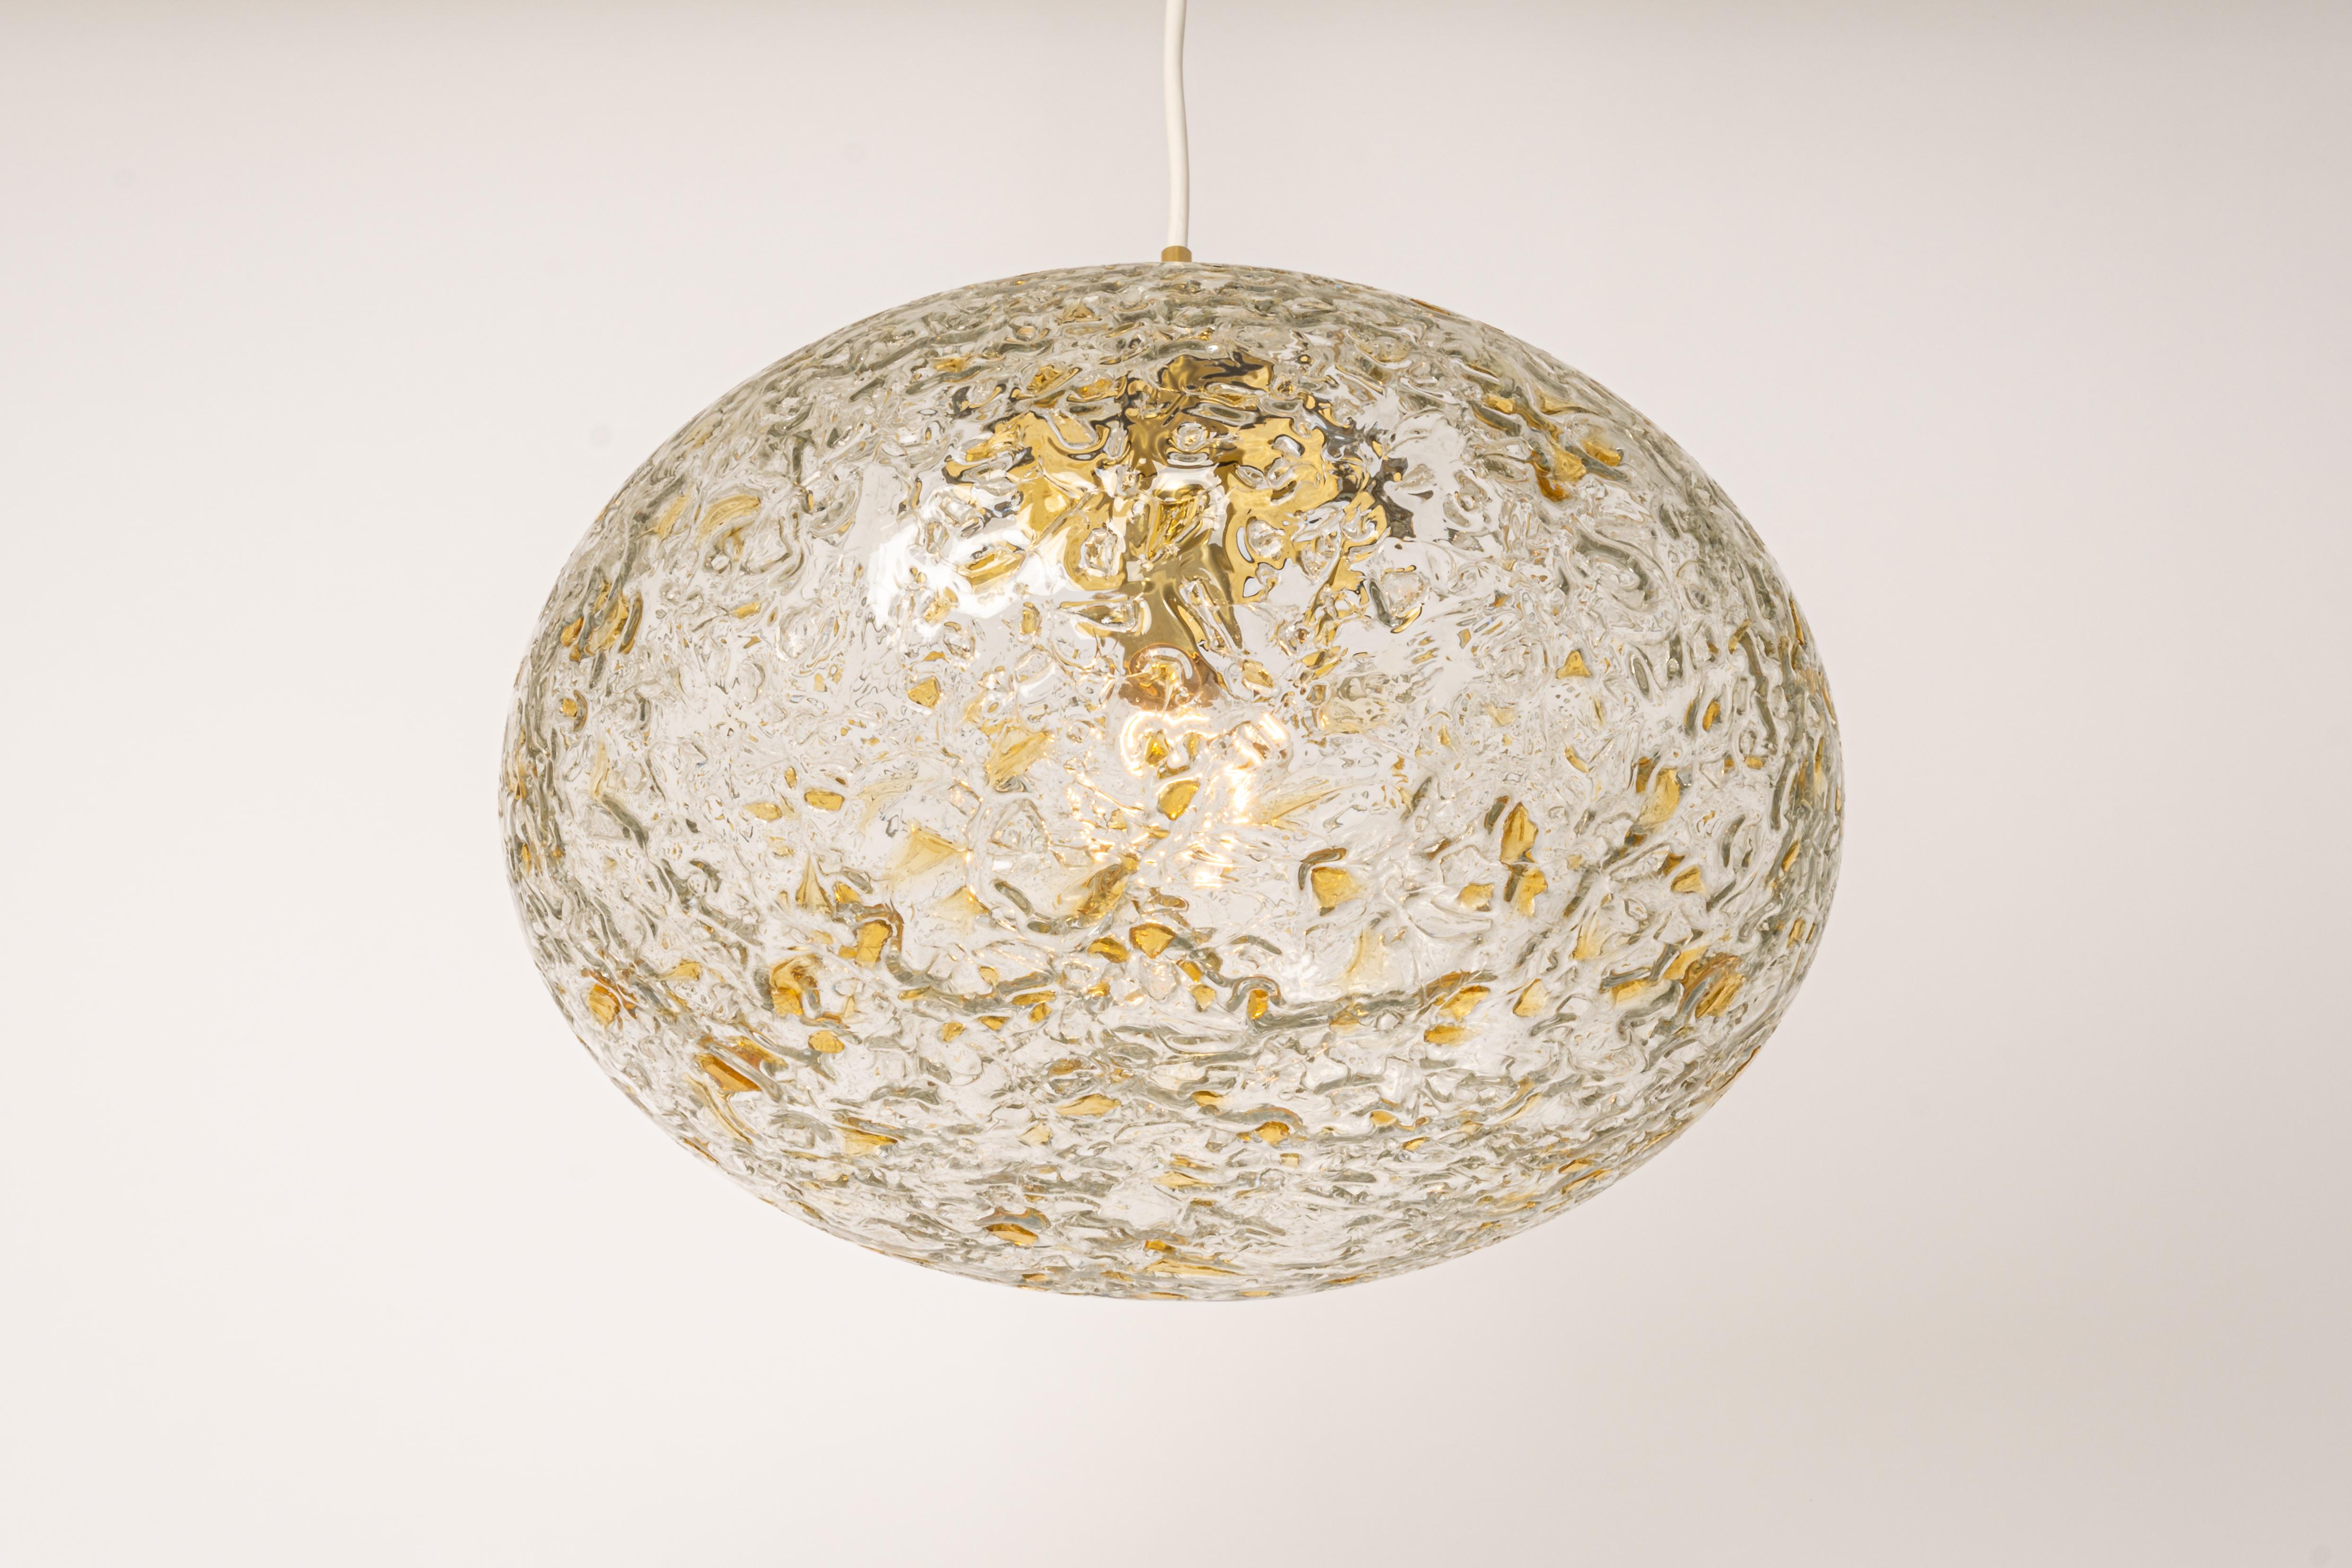 Doria ceiling light with large volcanic murano glass ball.
High quality of materials, gives a wonderful light effect when it is on.
Very good condition. Cleaned, well-wired and ready to use. 
The fixture requires one standard bulb (E-27)
Light